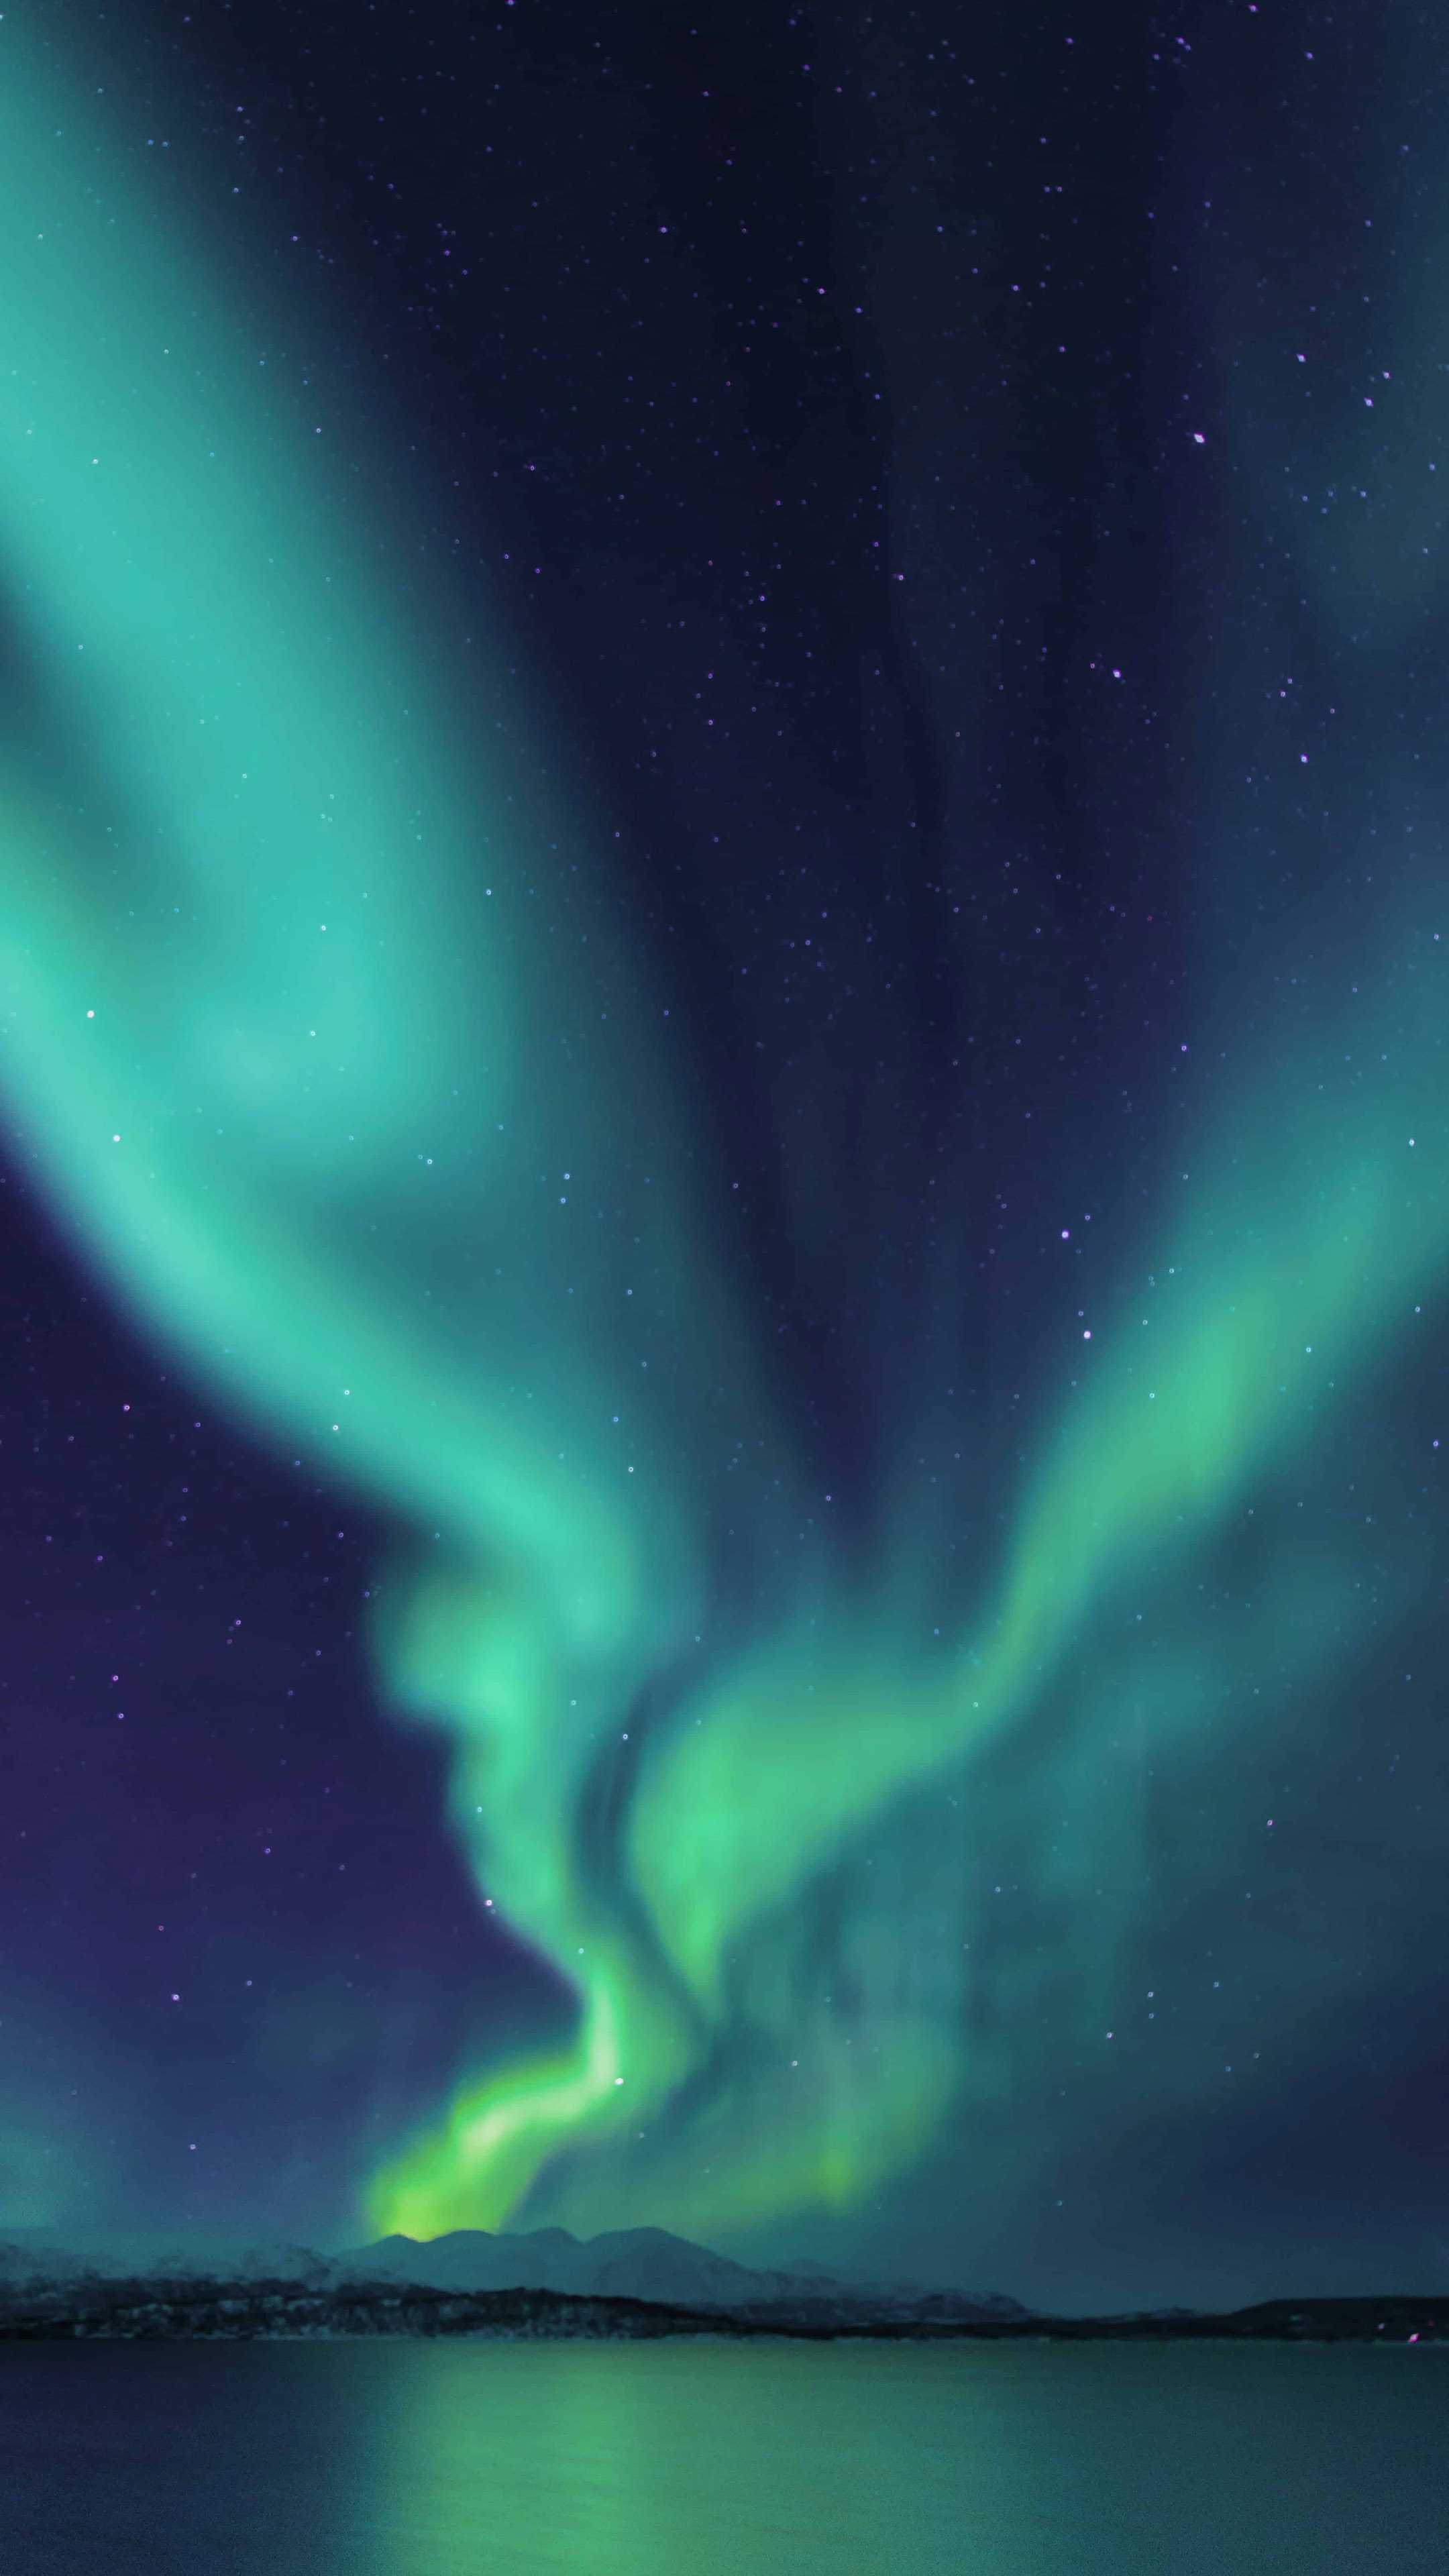 Finland: Northern lights, Swedish is the native language of 5.2% of the population. 2160x3840 4K Wallpaper.